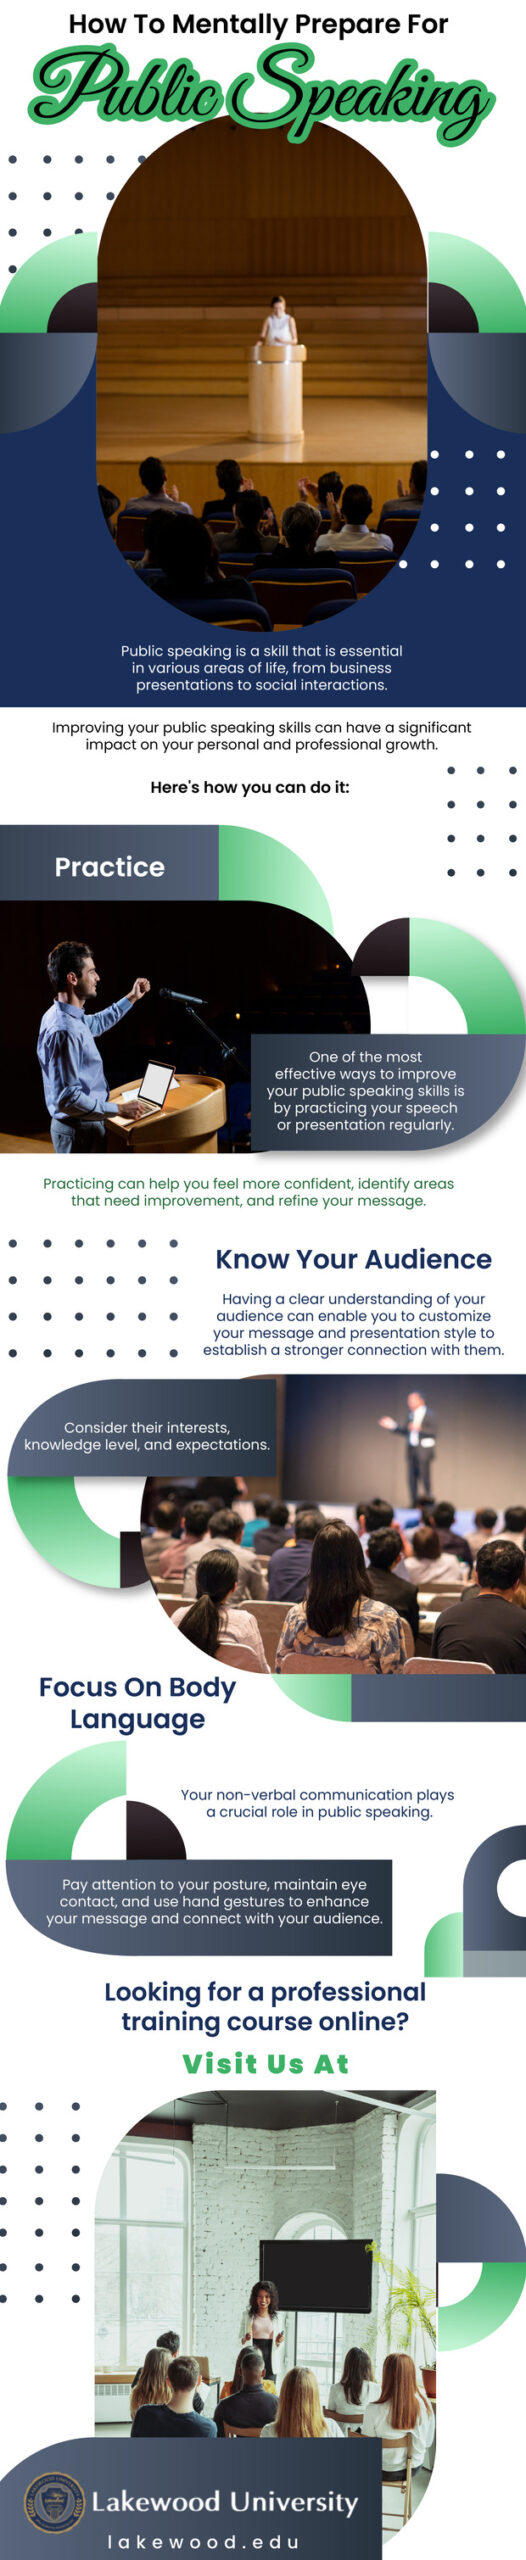 How to Mentally Prepare for Public Speaking